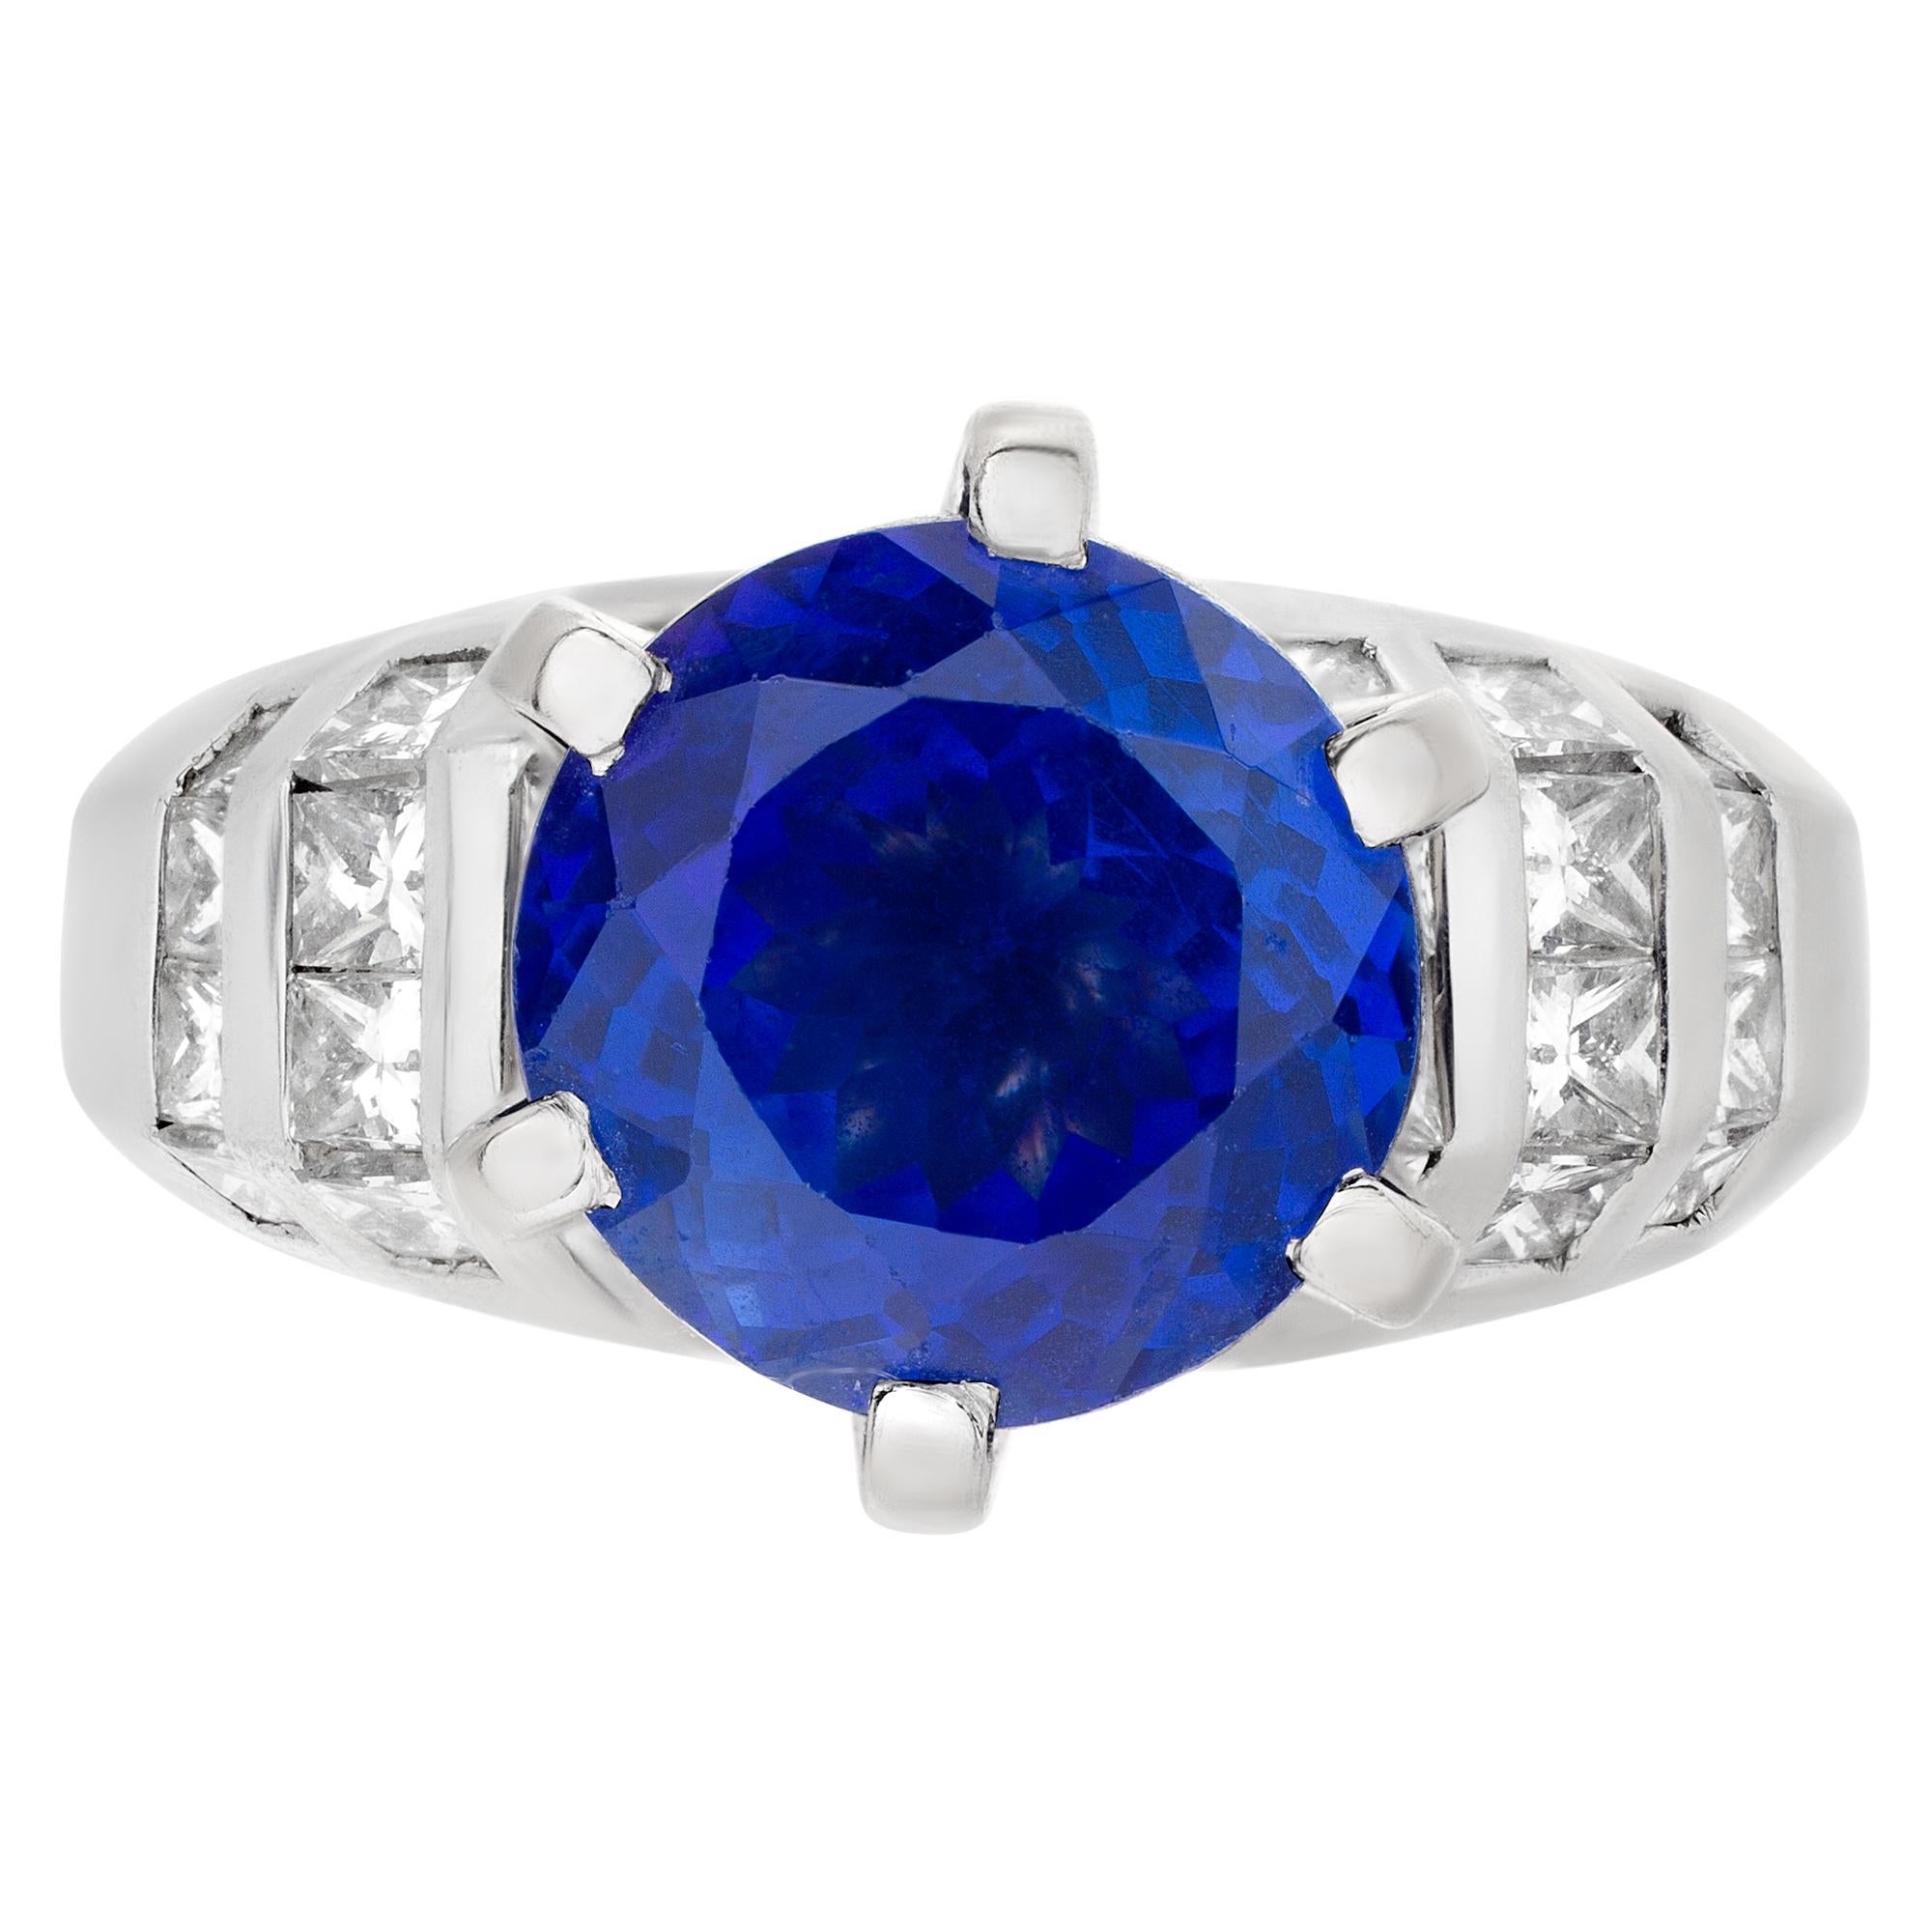 Elegante diamonds platinum ring with a 4 carat round cut center Tanzanite. Platinum setting has approx 1 carat Princess cut diamond. Tanzanite: 10mm diameter. Size 7

This tanzanite/diamond ring is currently size 7 and some items can be sized up or